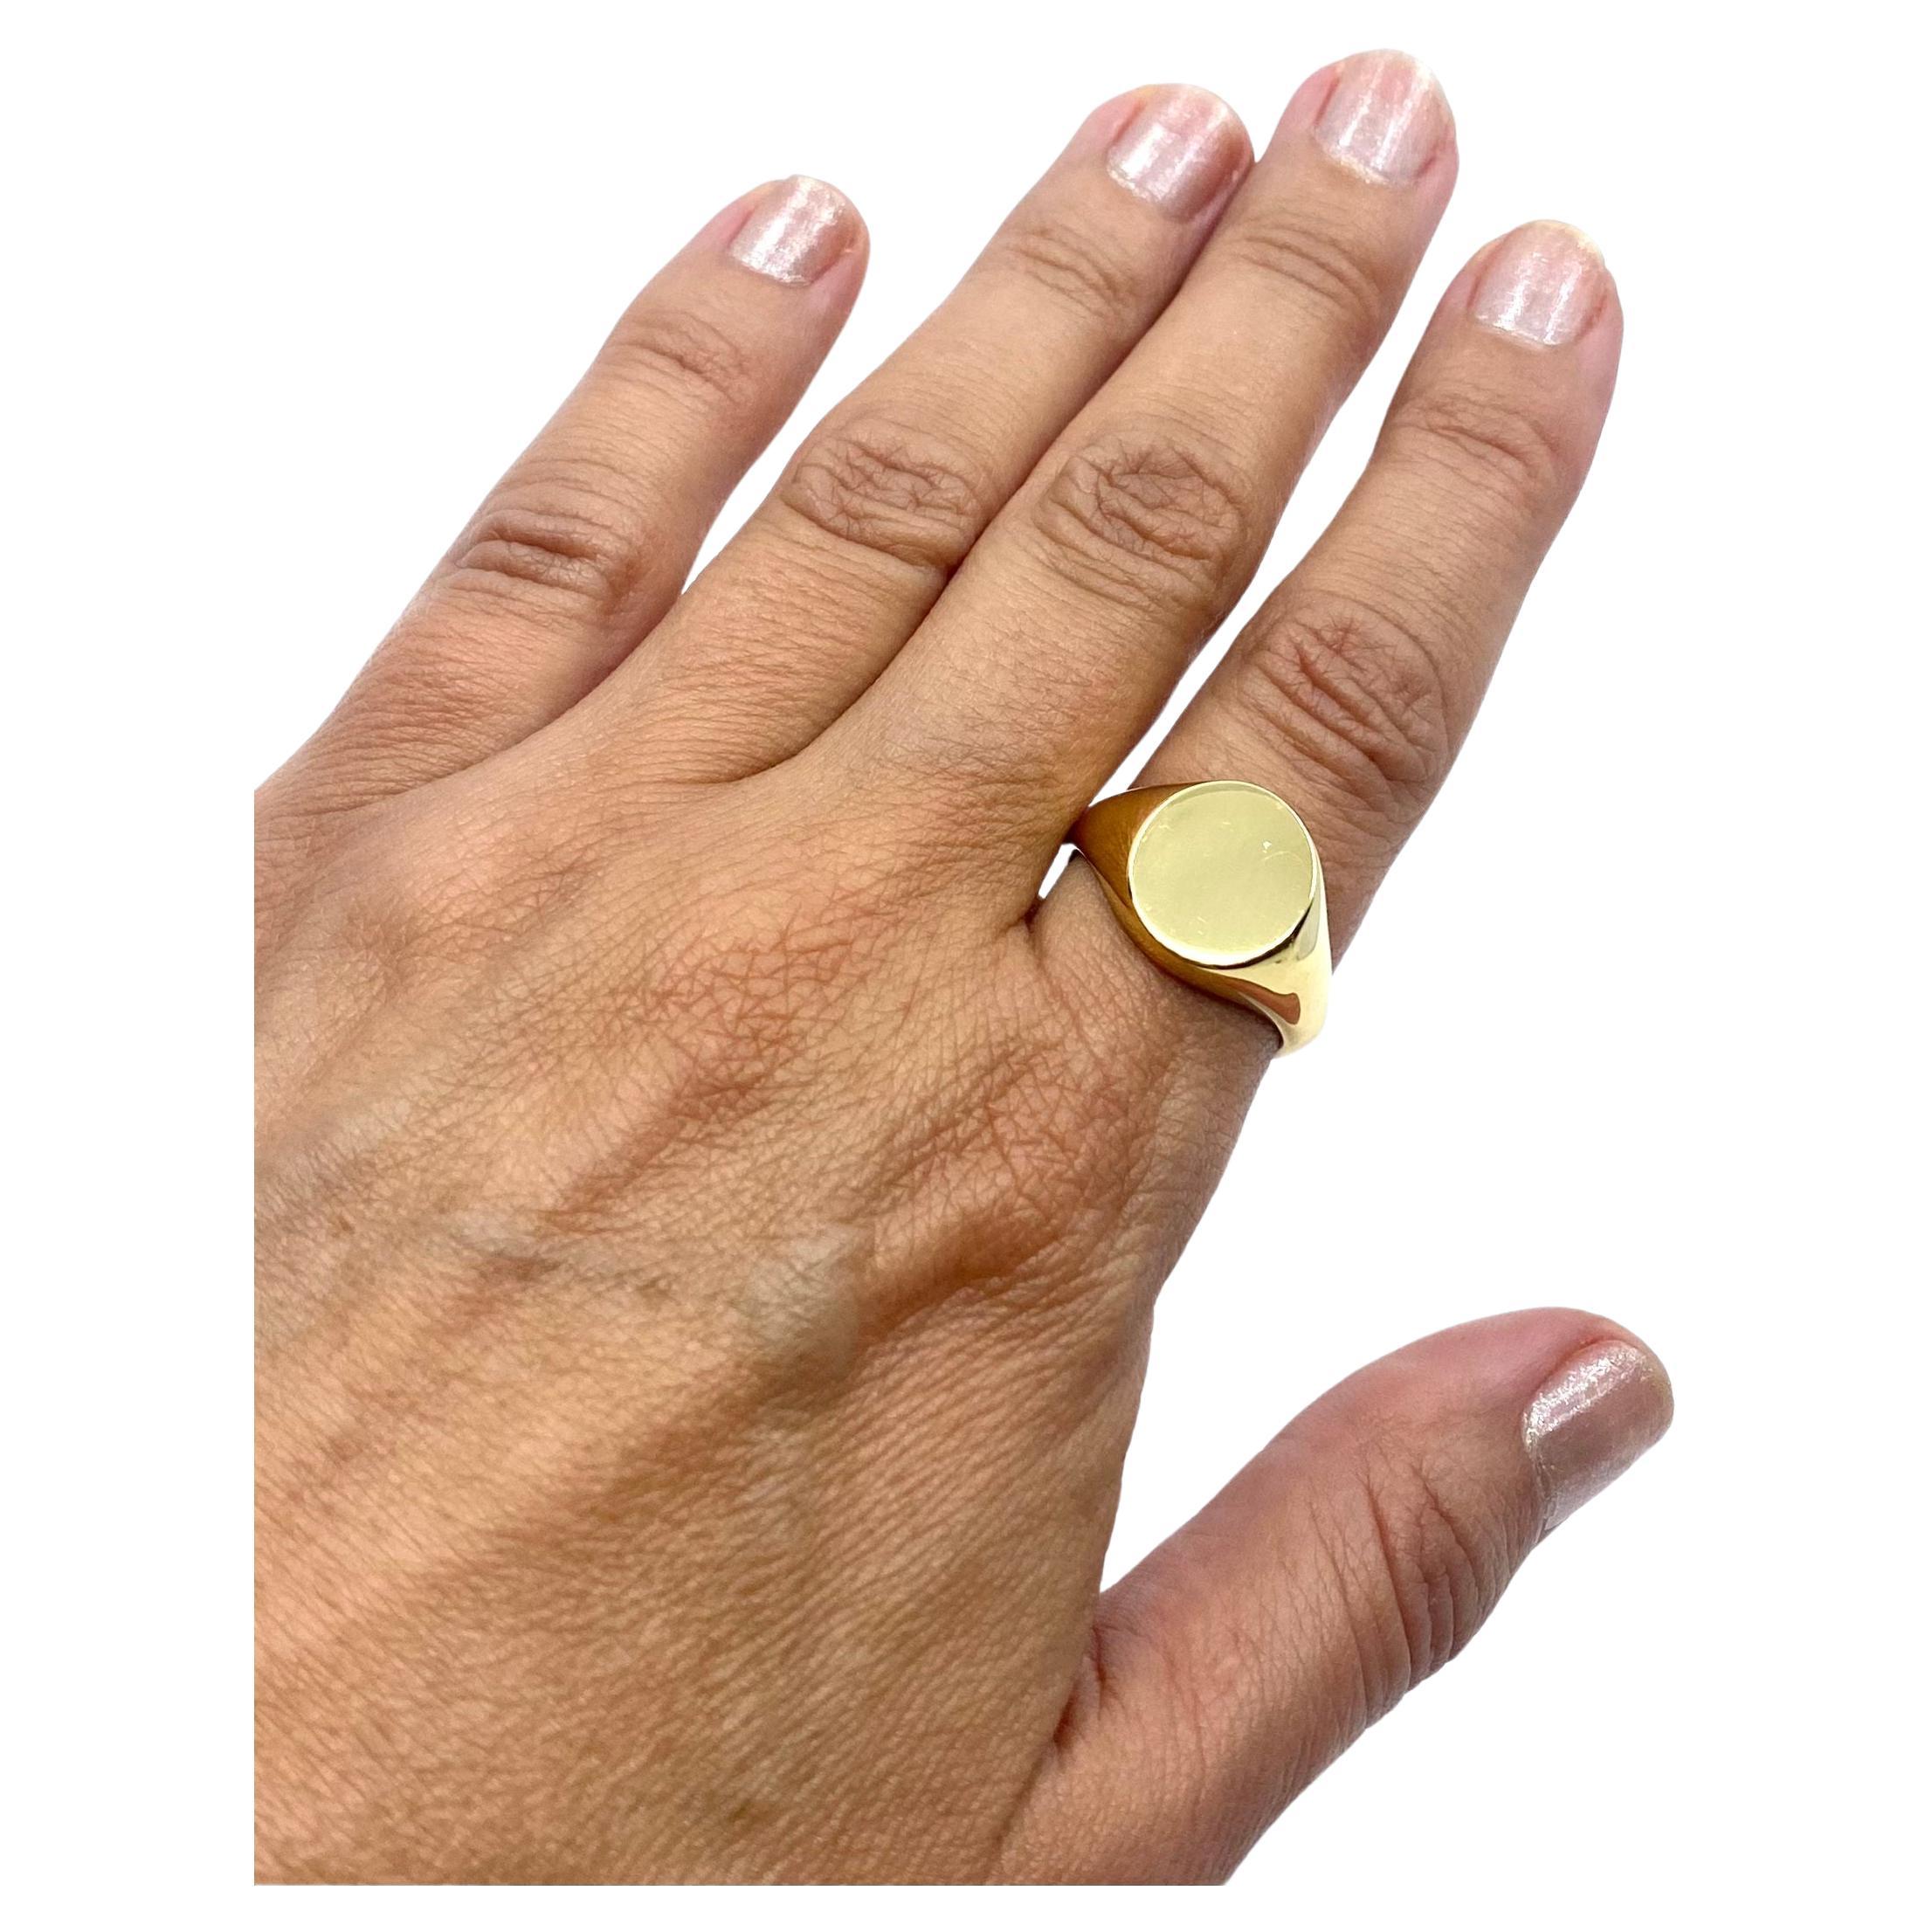 DESIGNER: Tiffany & Co.
CIRCA: 1970’s
MATERIALS: 18K Yellow Gold
WEIGHT: 14.3 grams
MEASUREMENTS:  1/2”
RING SIZE: 9.75 - 10
HALLMARKS: Tiffany & Co., 750

ITEM DETAILS:
​Less is more for this Tiffany & Co. Gold Signet Ring, made of 18k yellow